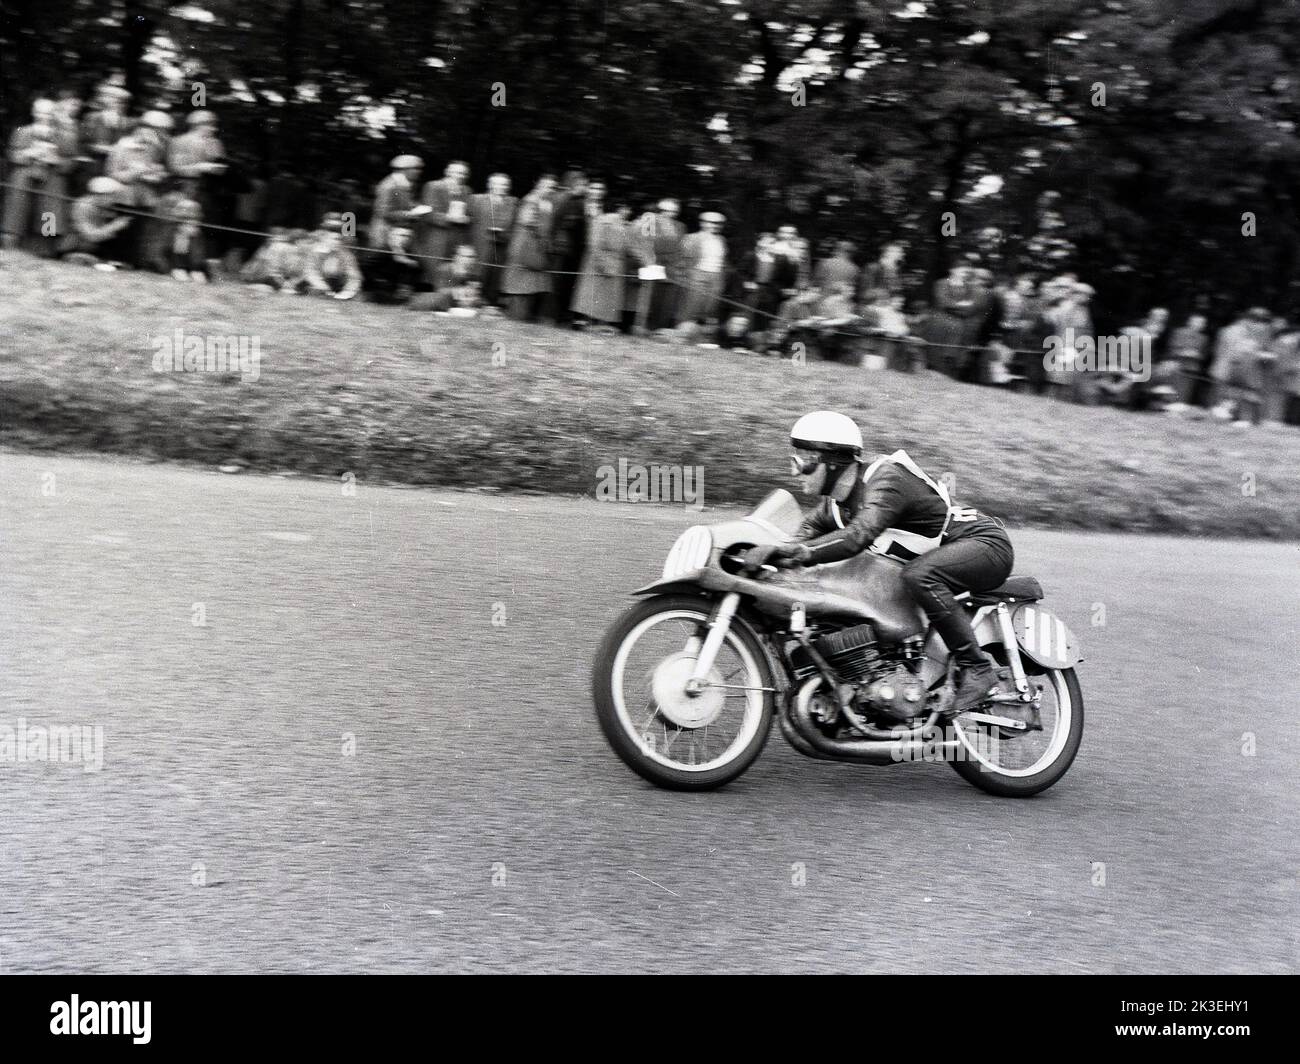 1954, historical, a racer on the course at the Scarborough races, England, UK. Stock Photo